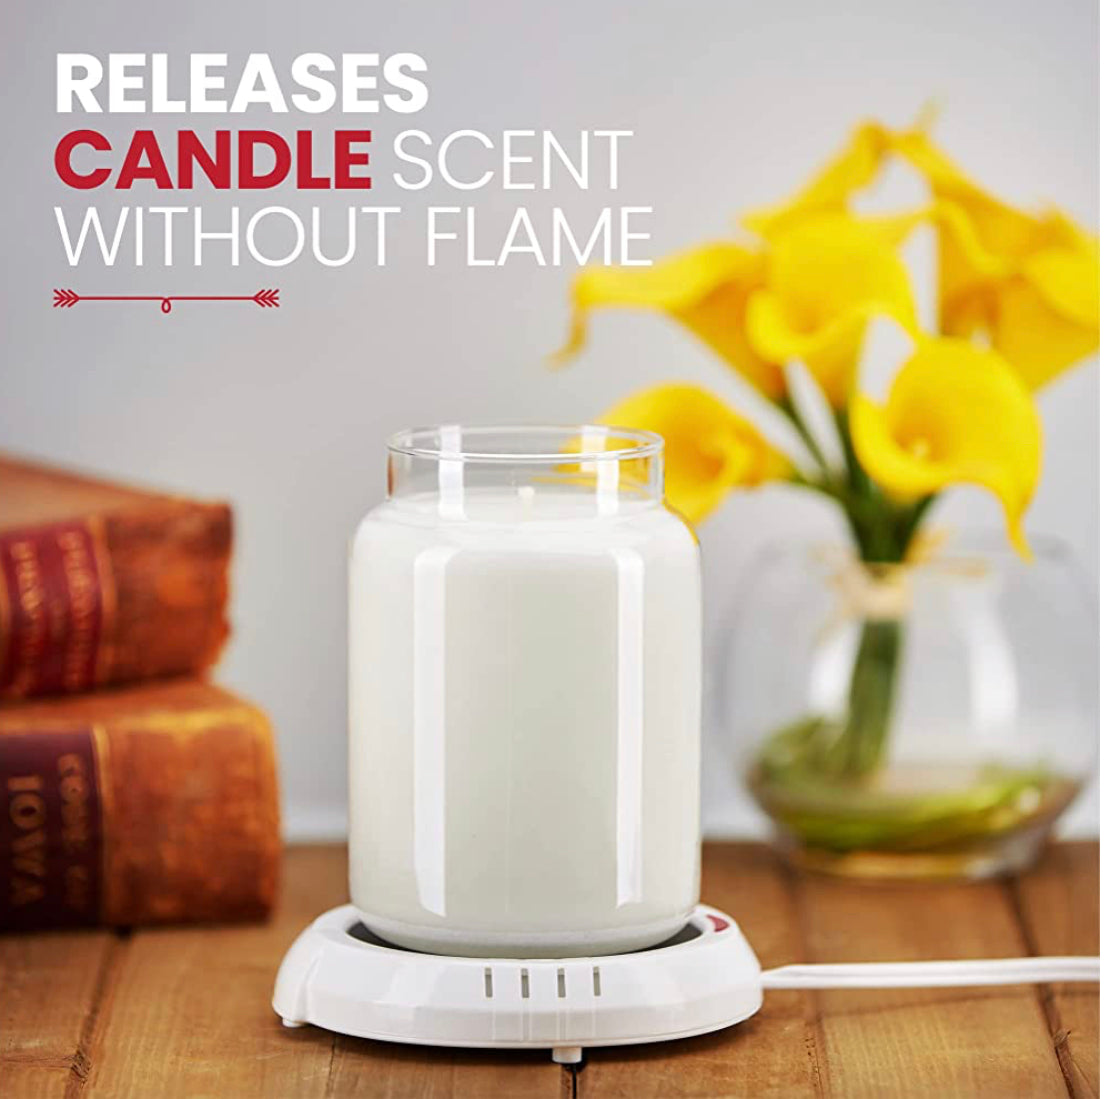 Electric Candle Warmer for Wicked and Wickless Candles